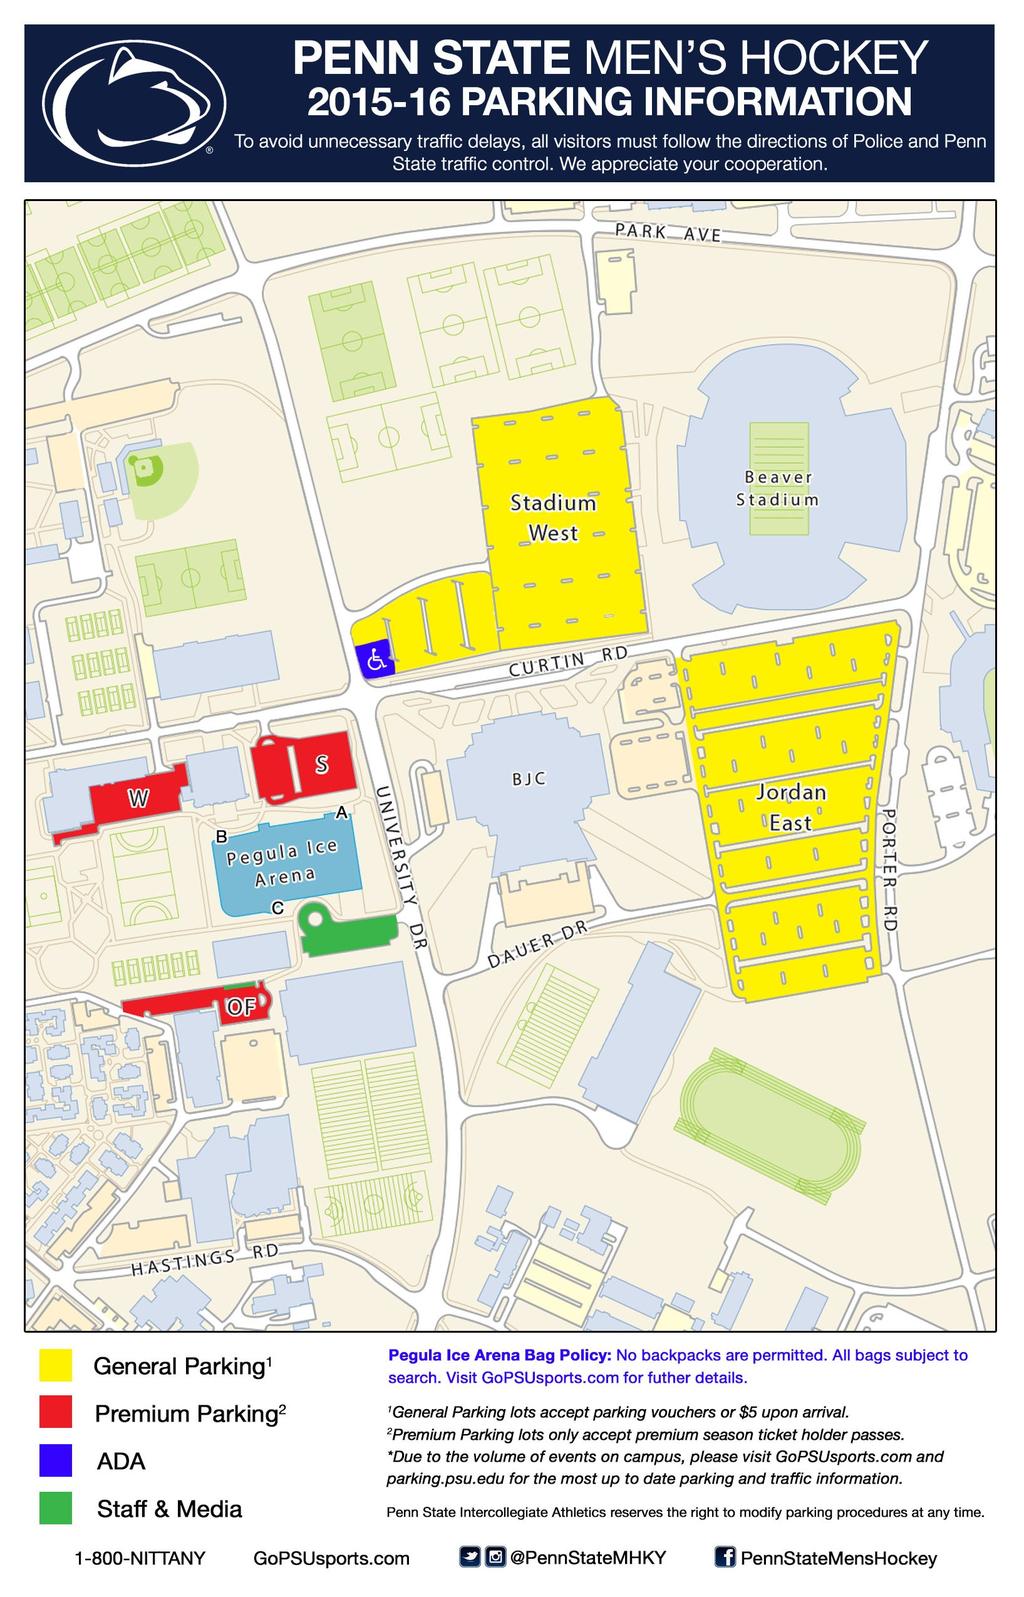 PARKING Premium Seat Holders will have access to premium parking lots. The Shields (S), Wagner (W), and East Area Locker Room/Tennis Center (OF) parking lots will be reserved for premium seat holders.